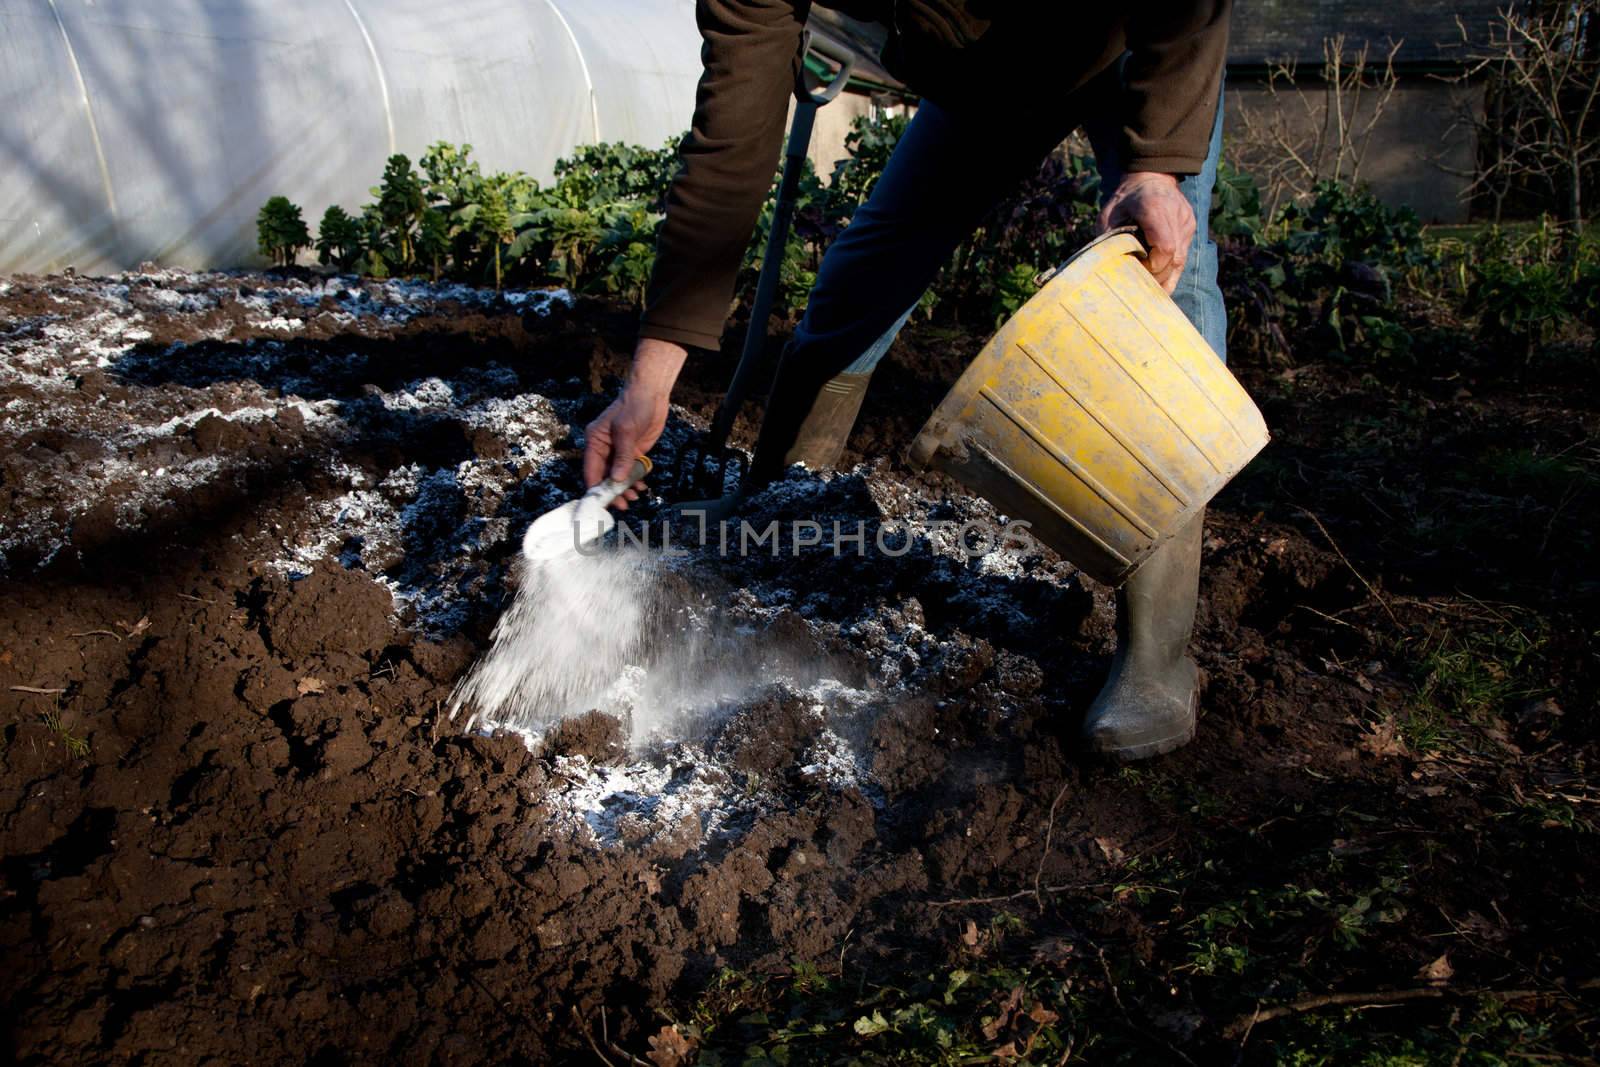 A man stands in a dug over patch of soil with a bucket and trowel sprinkling lime on the earth.